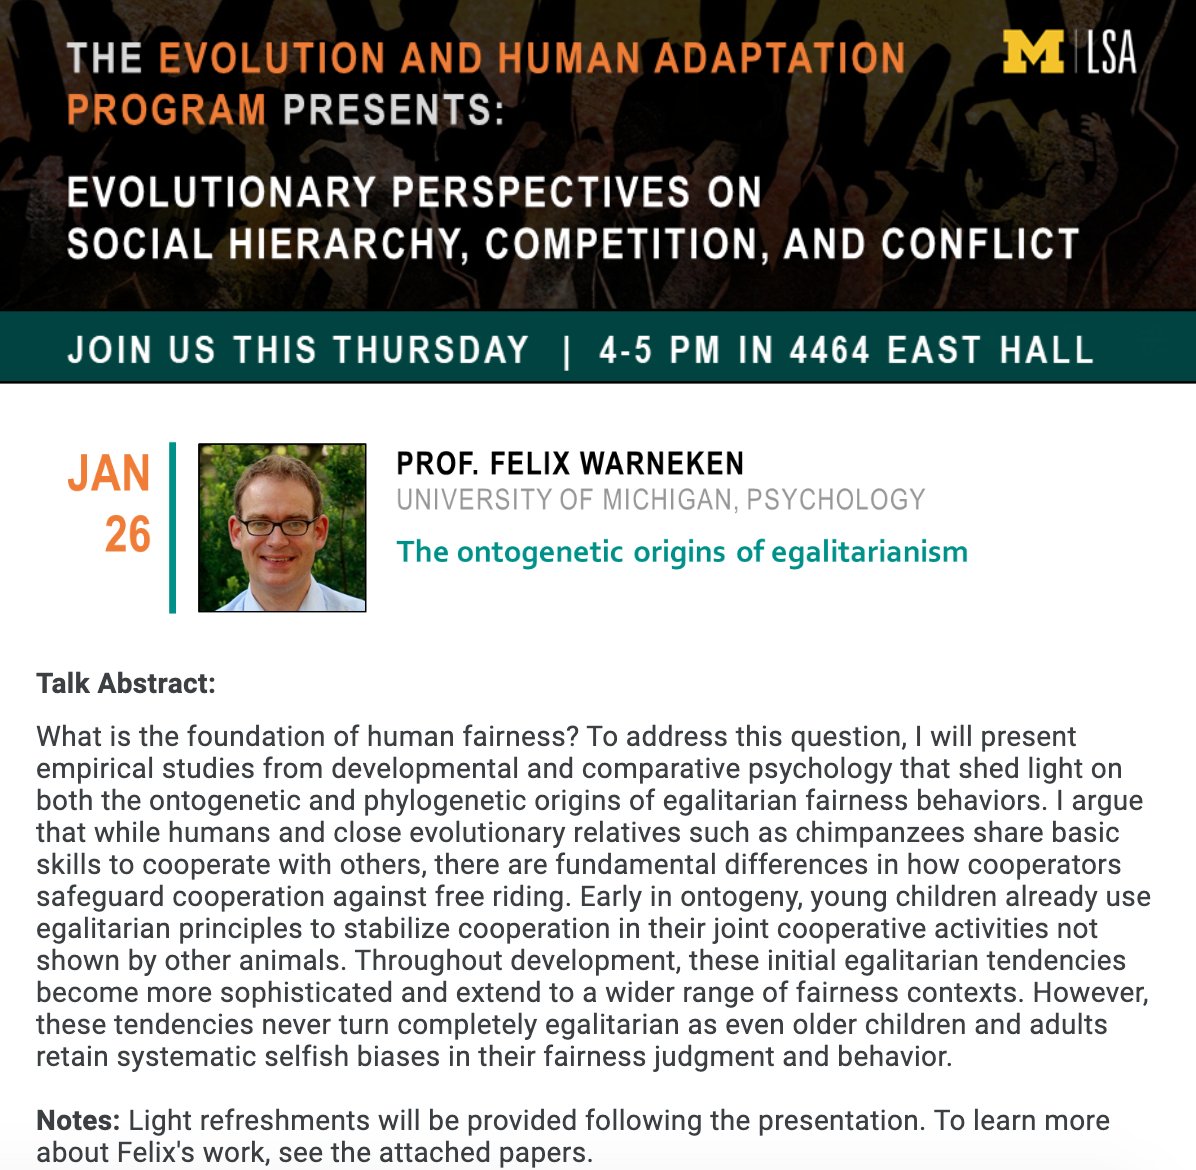 Join us again this Thursday for the next talk in the EHAP Winter 2023 Lecture Series! We will be hearing from one of our own, Felix Warneken, on the Ontogenetic Origins of Egalitarianism.